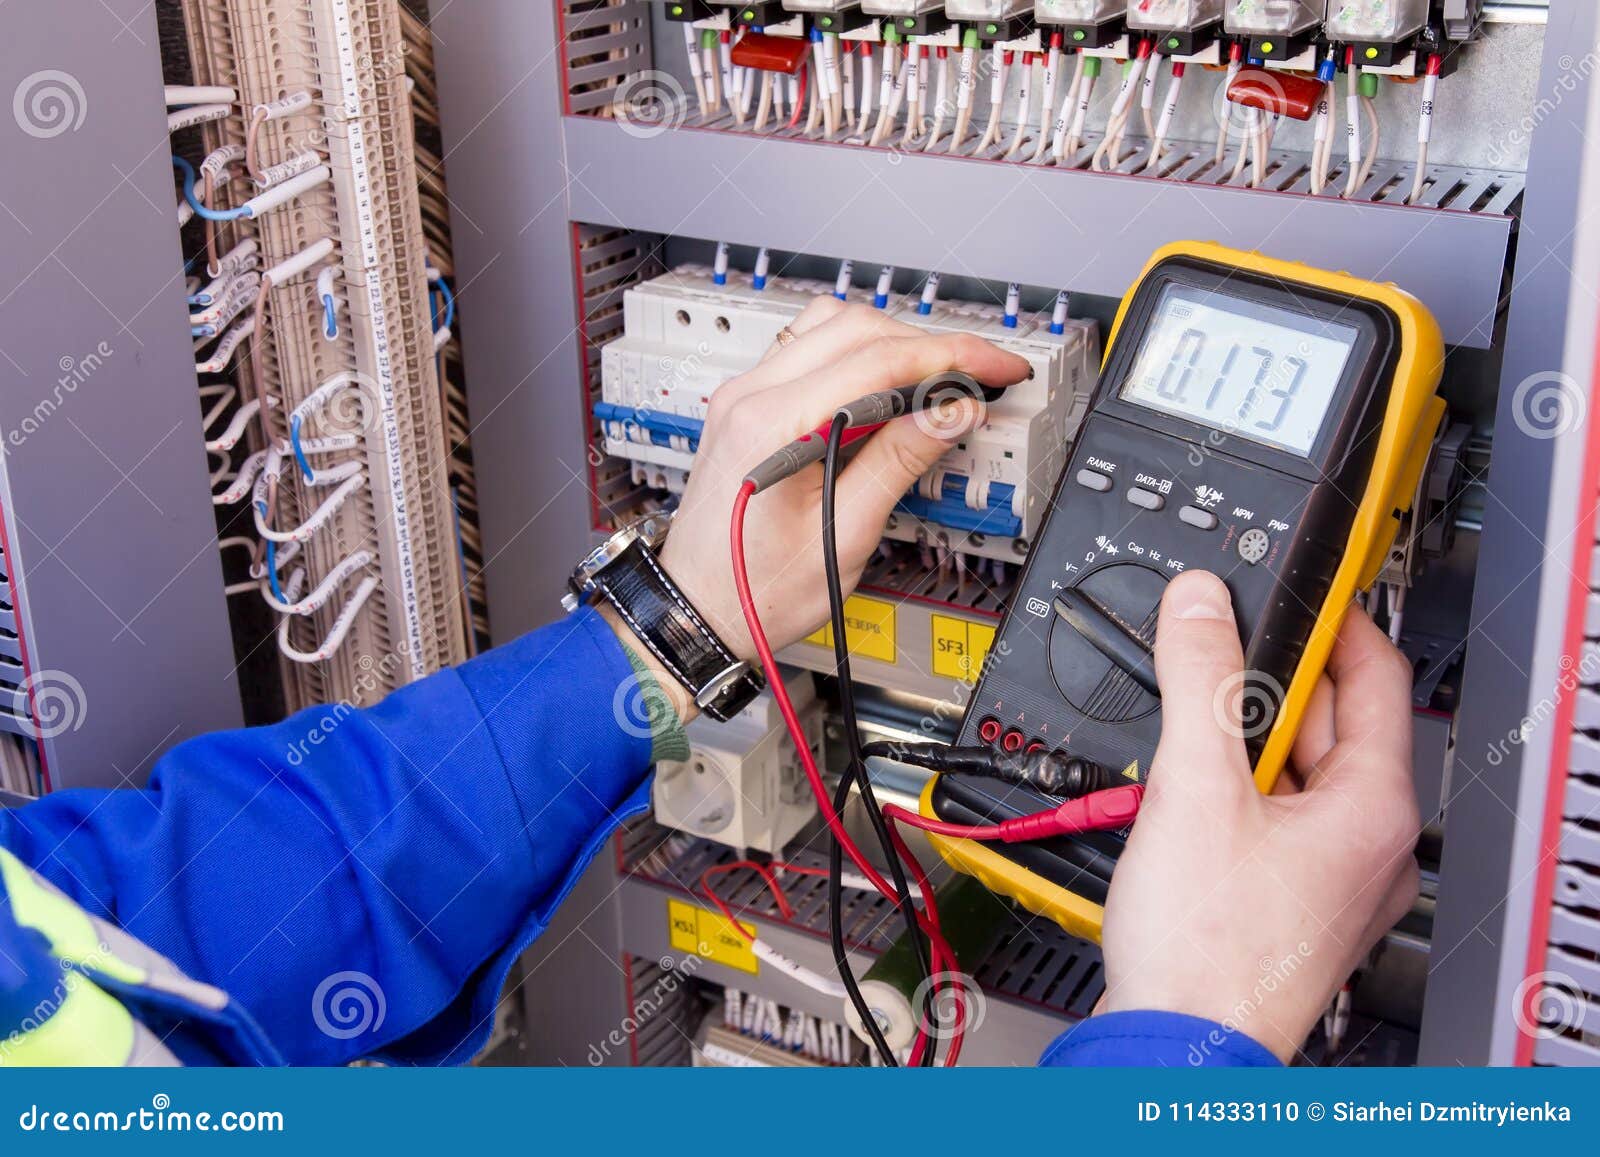 multimeter is in hands of engineer in electrical cabinet. adjustment of automated control system for industrial equipment